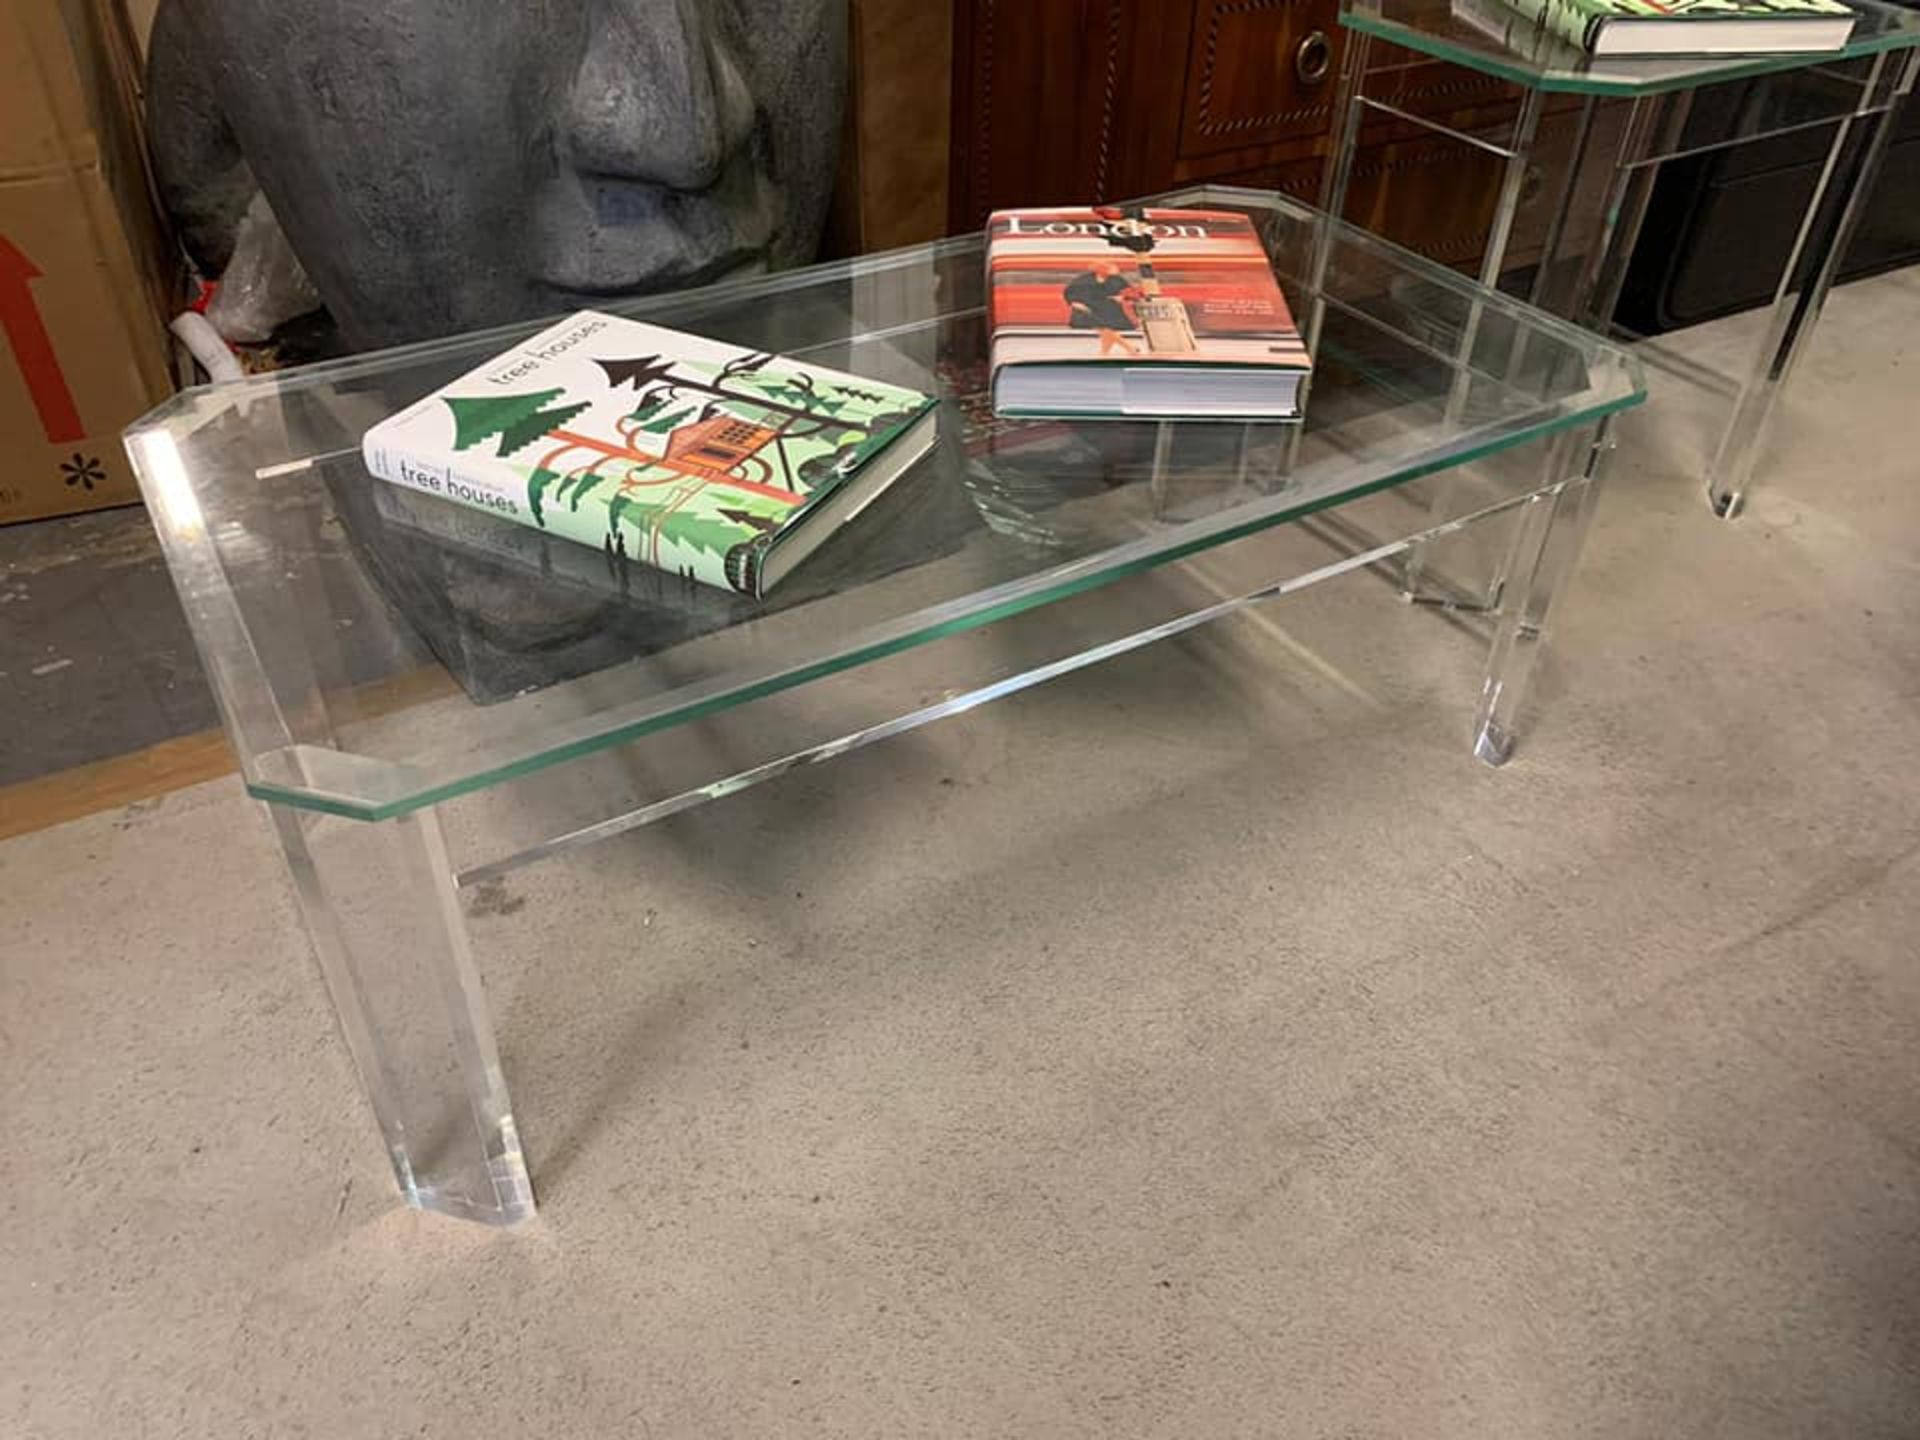 Andrew Martin Augustine Acrylic Coffee Table